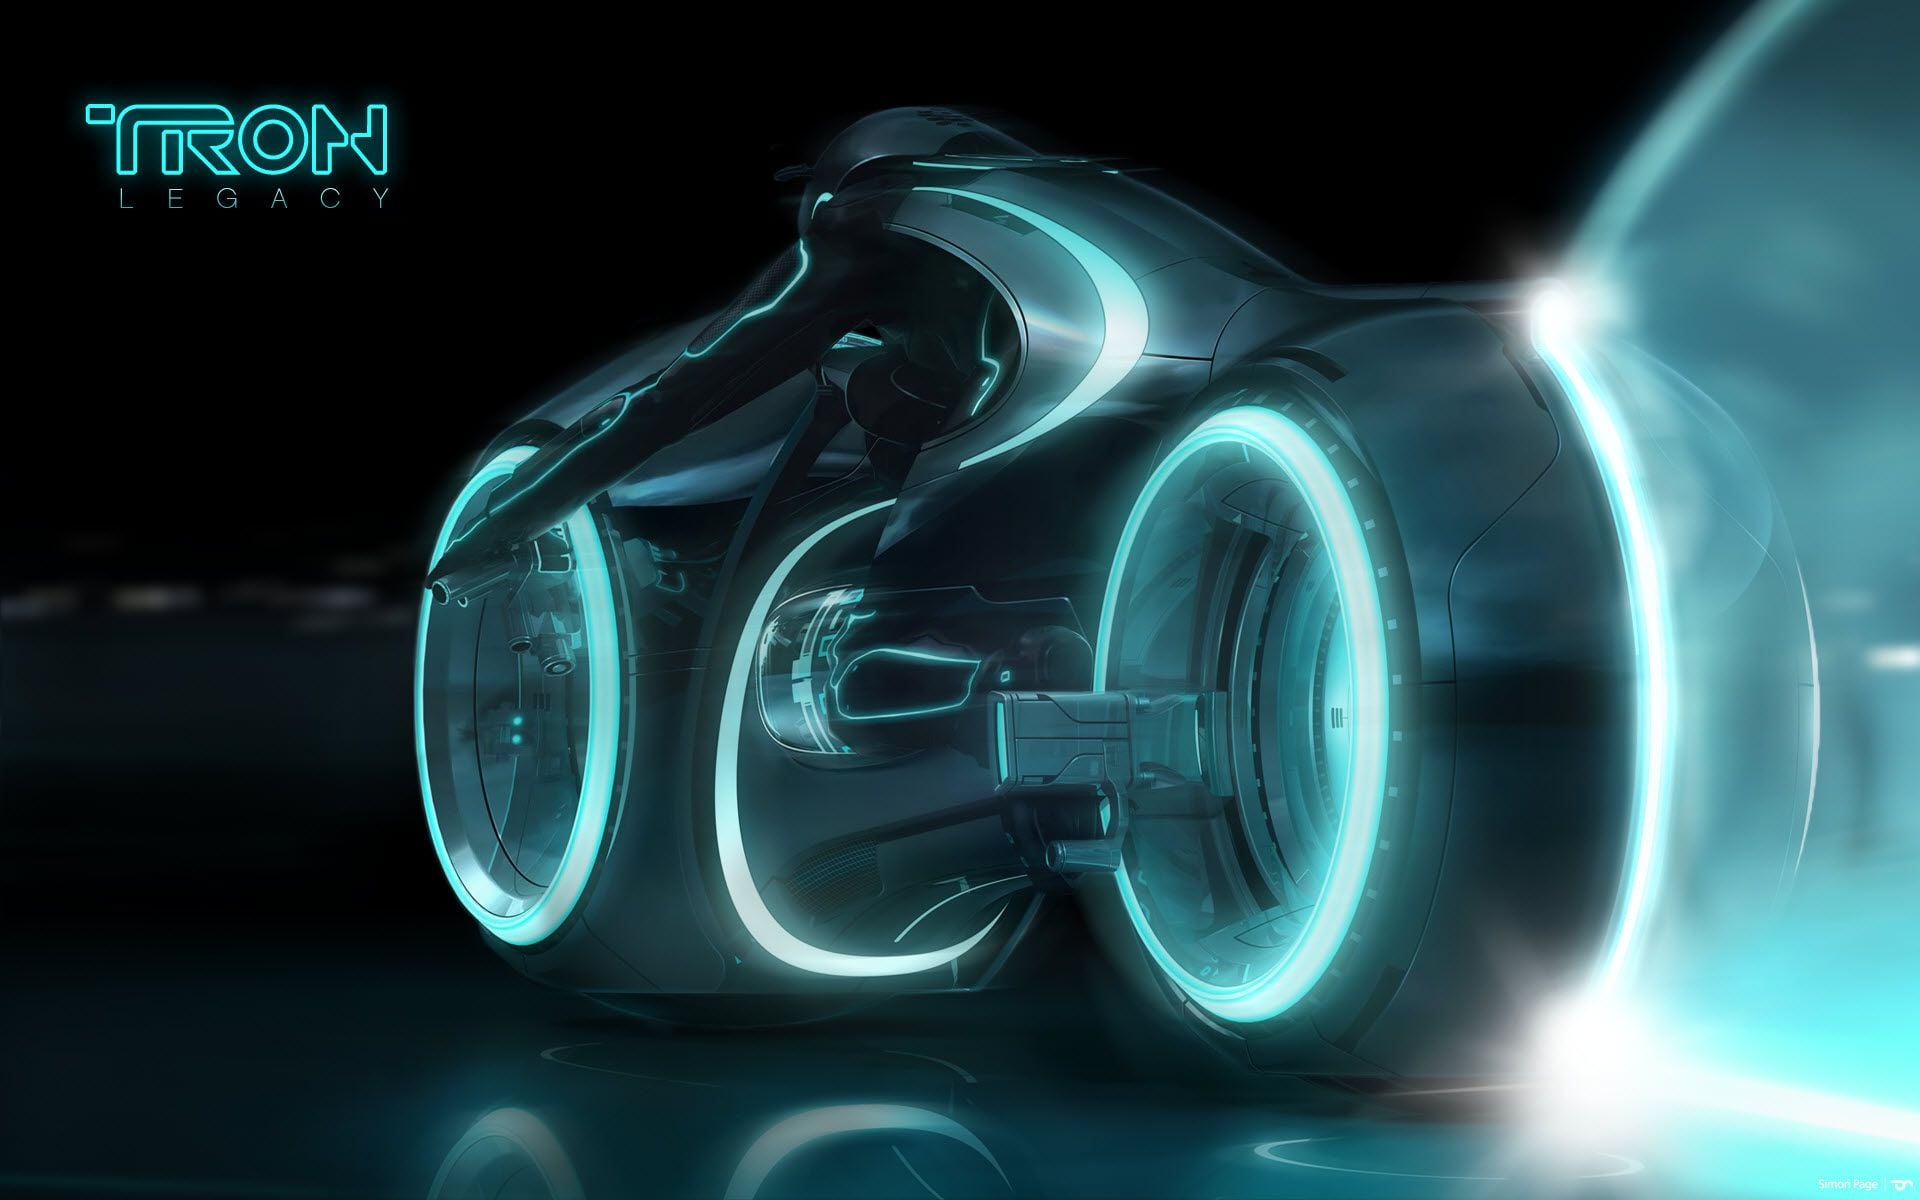 The Spirit motorbike bears an uncanny resemblance to the futuristic bikes featured in 